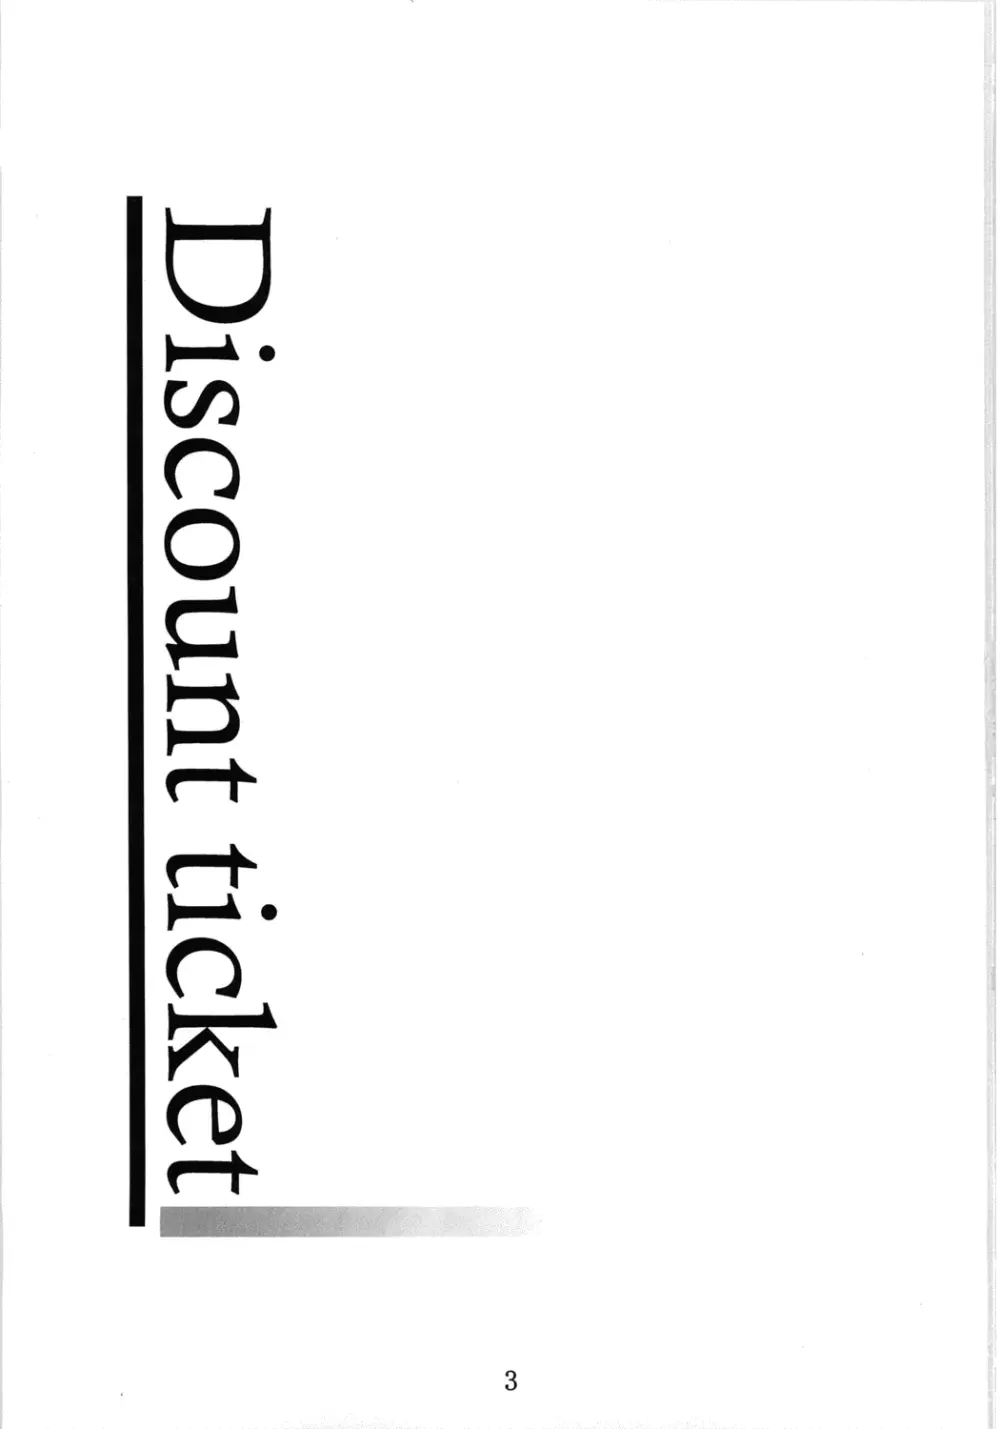 Discount ticket Page.2